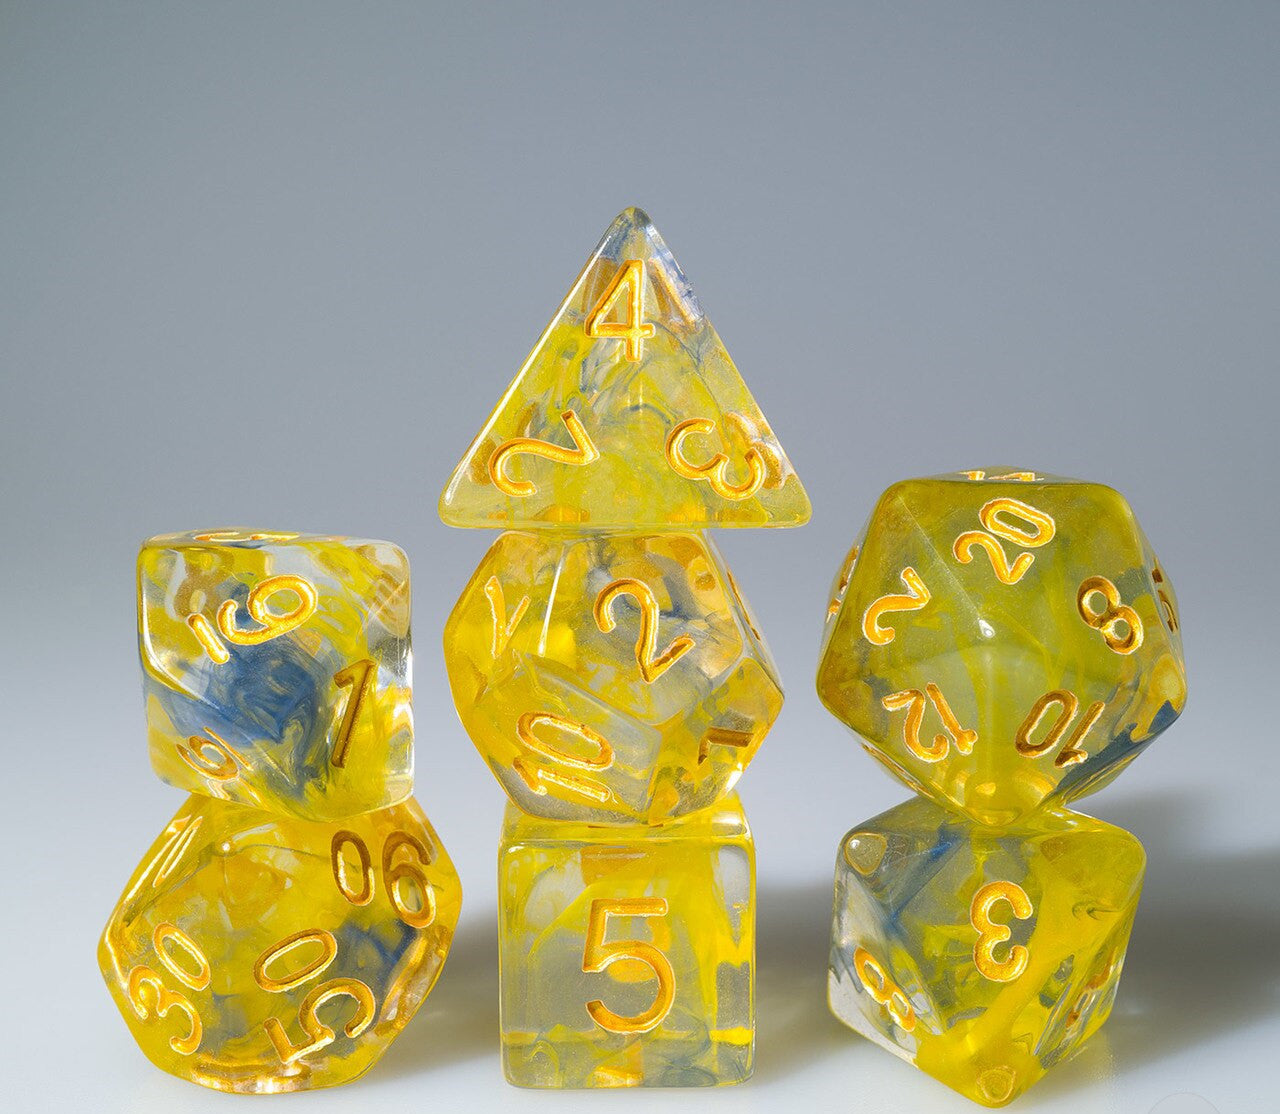 Yellow and Blue Swirl with Gold Ink 7pc Polyhedral Dice Set